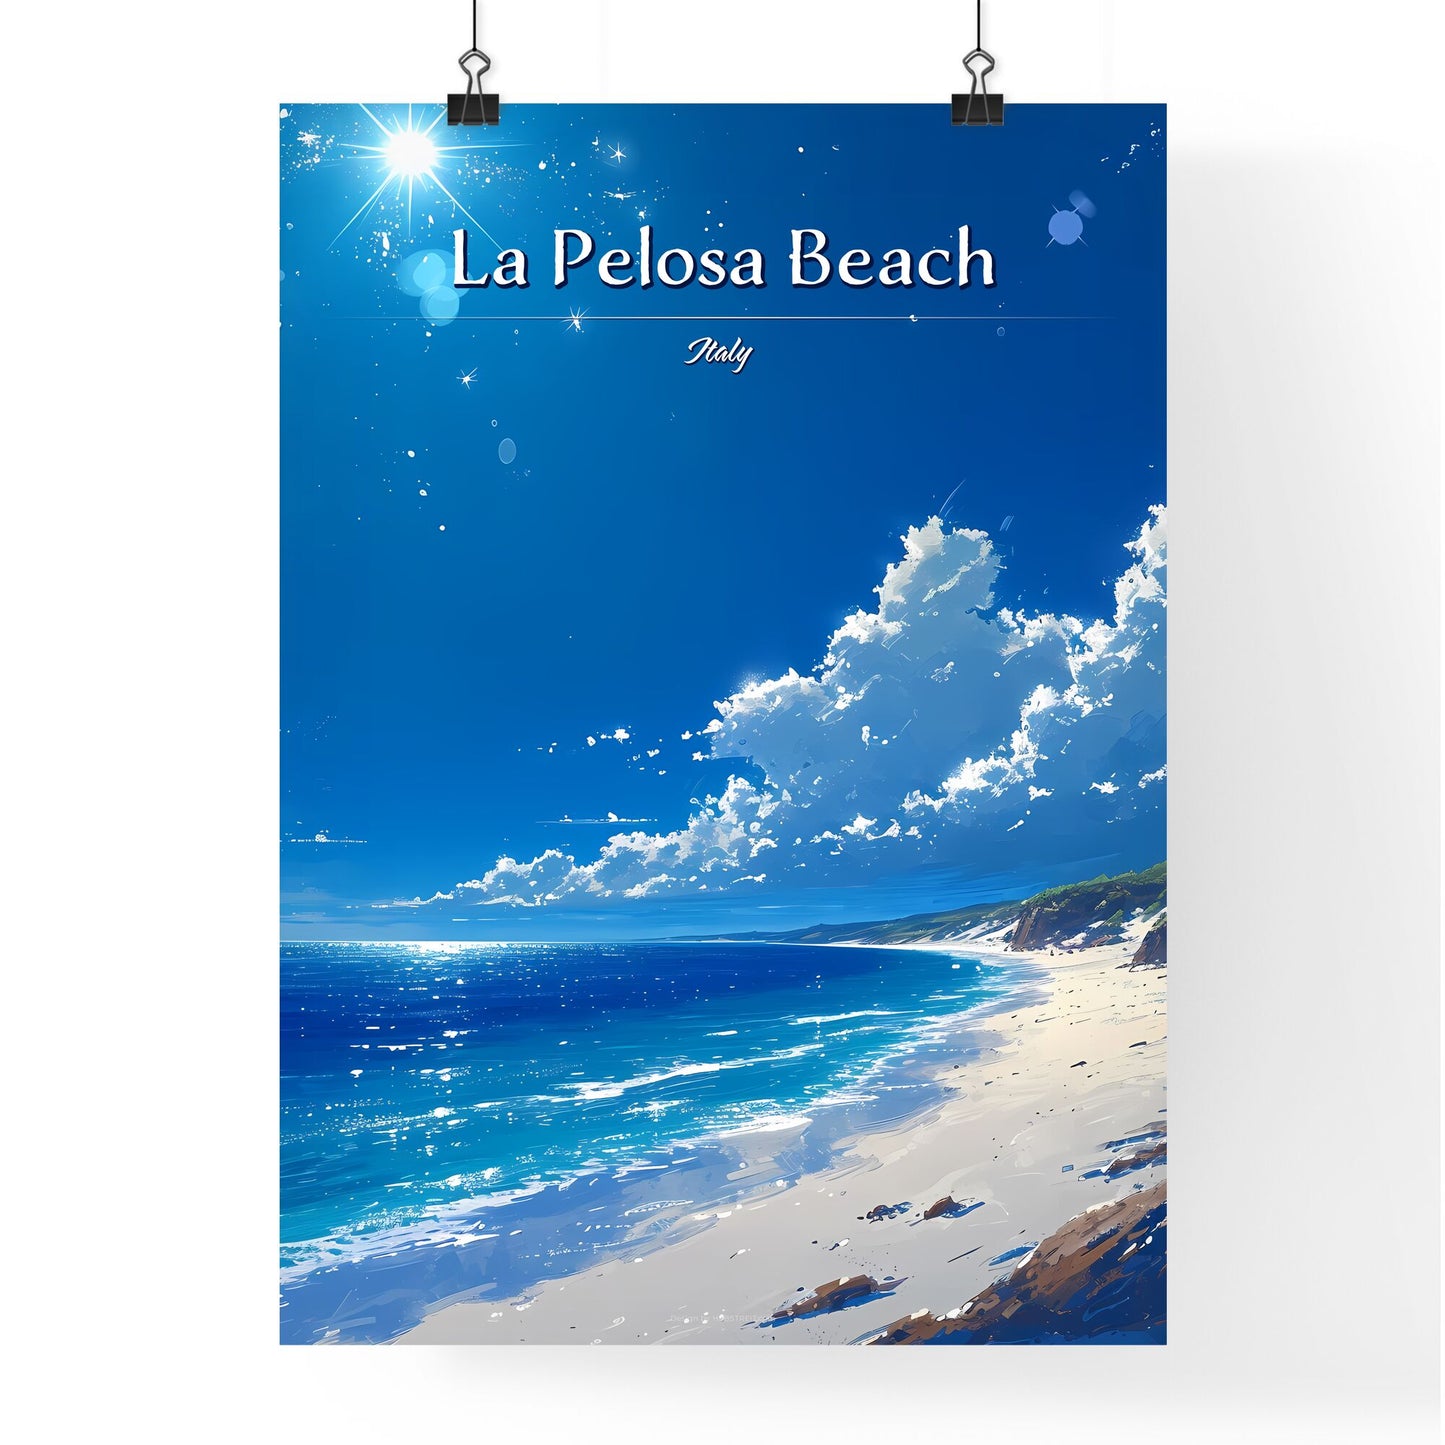 La Pelosa Beach, Italy - Art print of a woman in lingerie posing for a picture Default Title